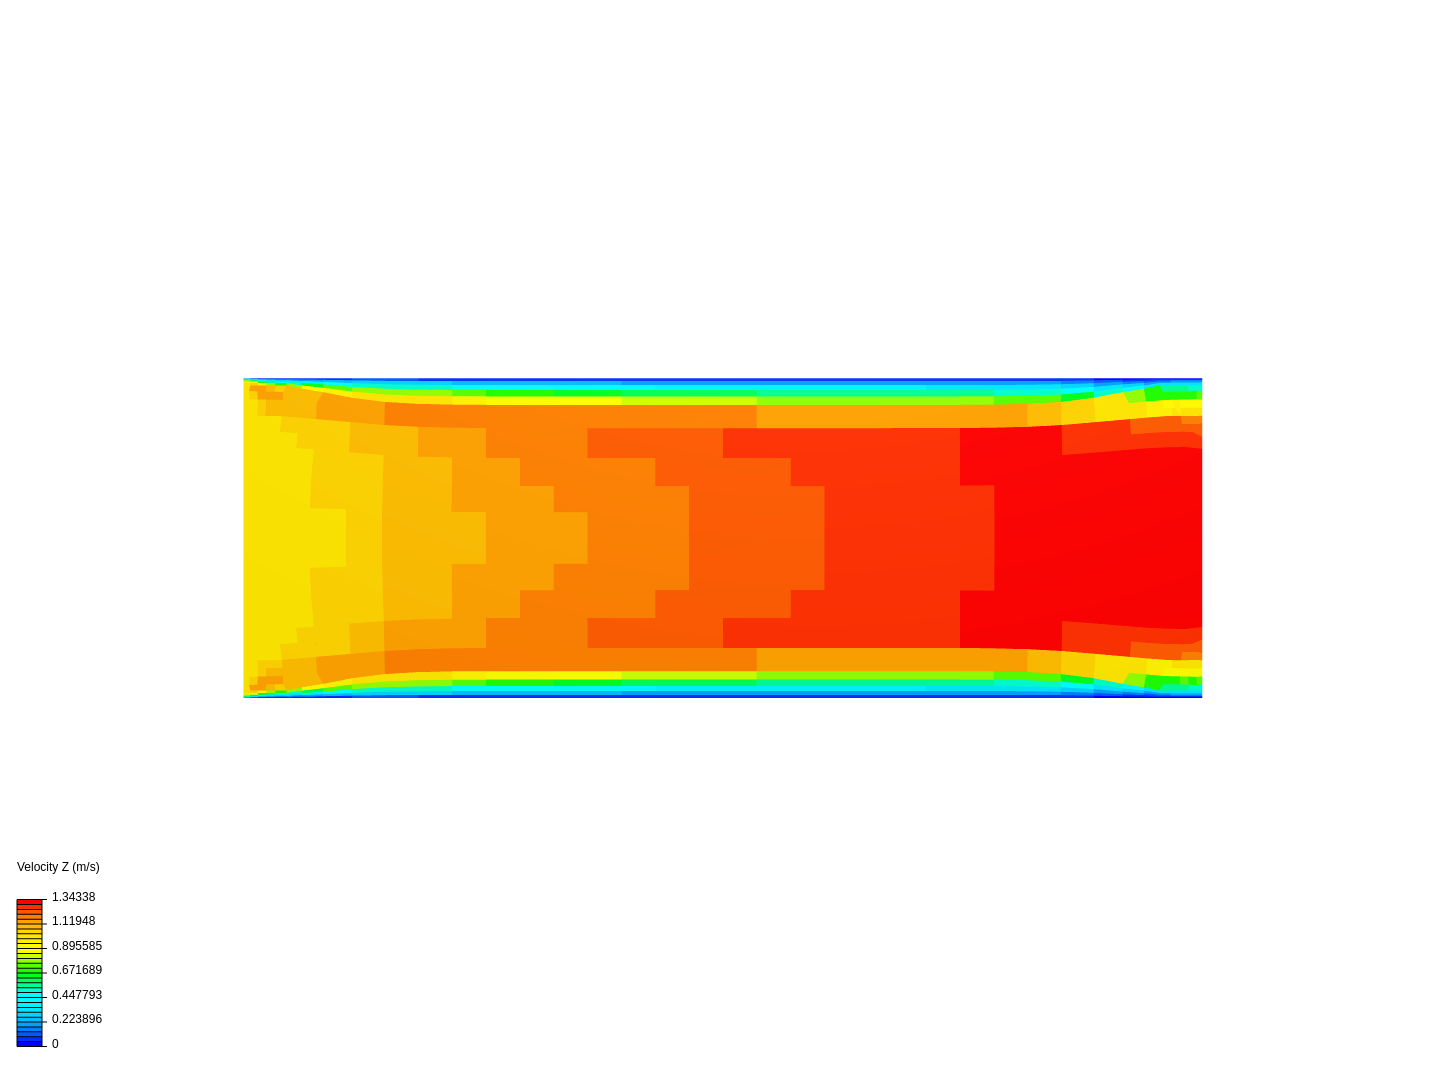 Boundary-Layer FLow image